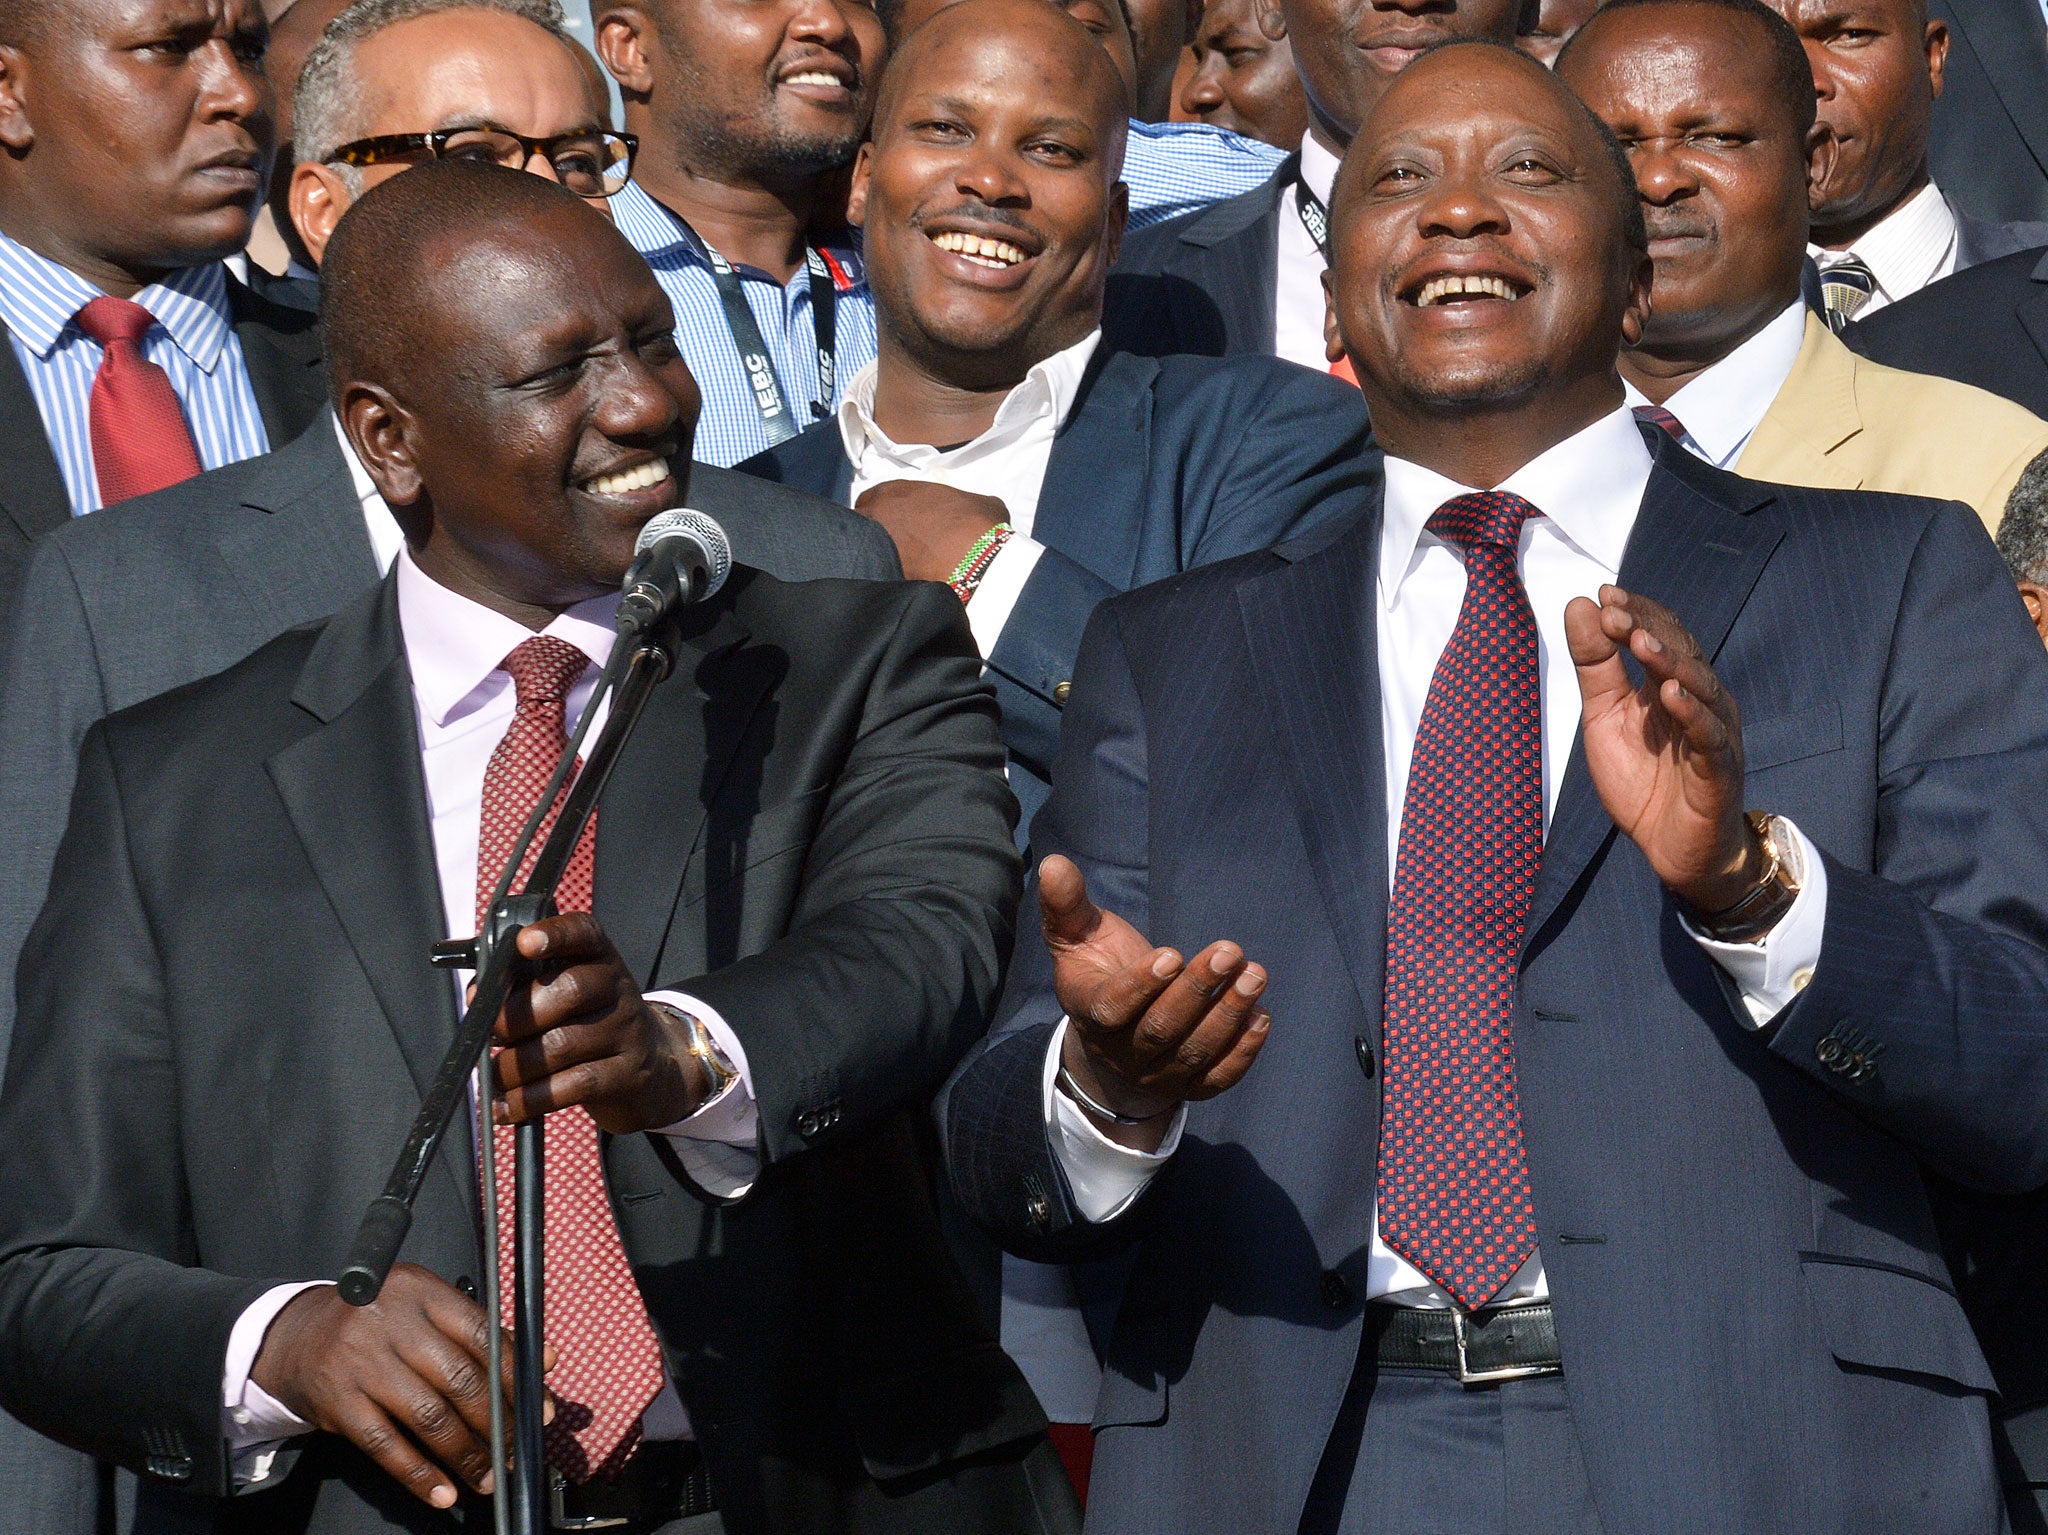 Newly elected President Uhuru Kenyatta (R) and running mate William Ruto (L) are pictured, following his victory in Kenya's national elections in Nairobi on March 9, 2013. Kenyatta will face charges at the International criminal court in July 2013.